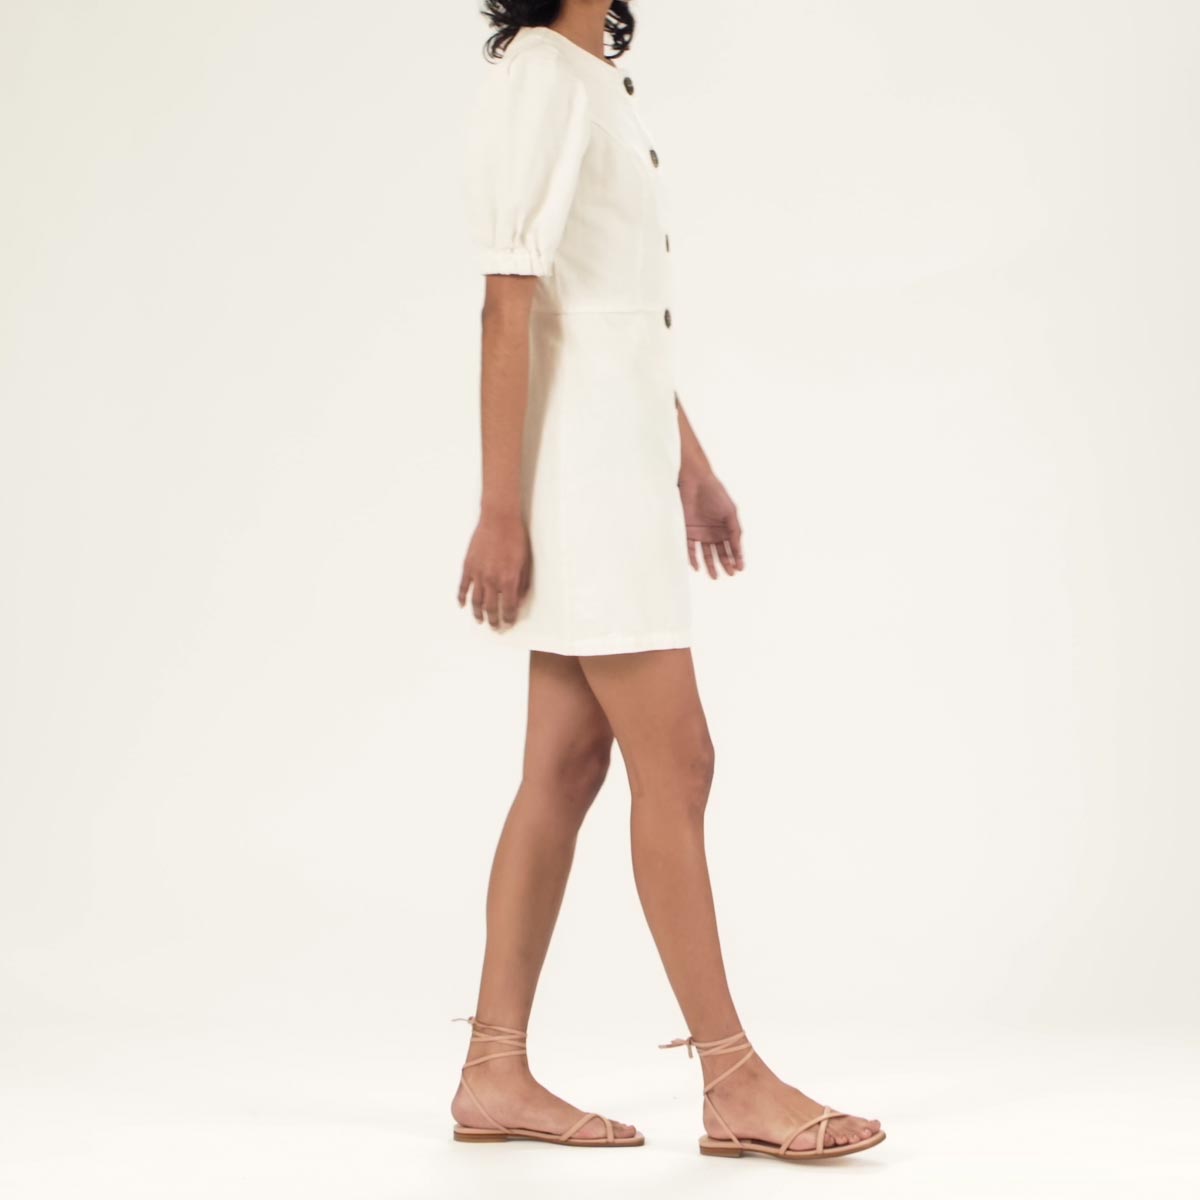 The Wrap Sandal in Rose Nappa shown on model styled with a short white puff-sleeve dress with button details down the front.